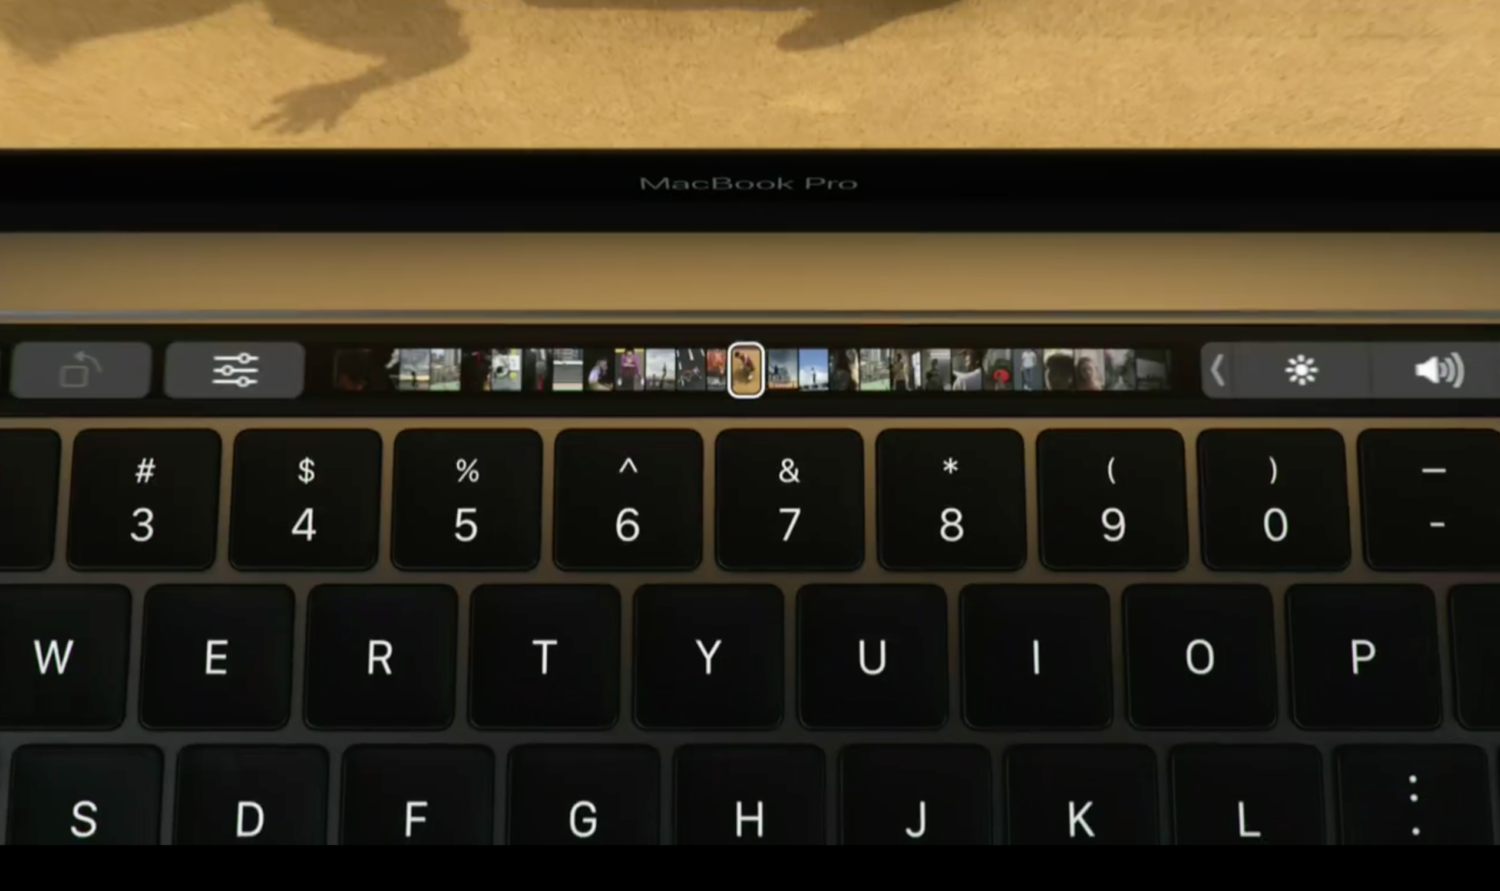 TouchBar is MacBook Pro's compelling new feature.